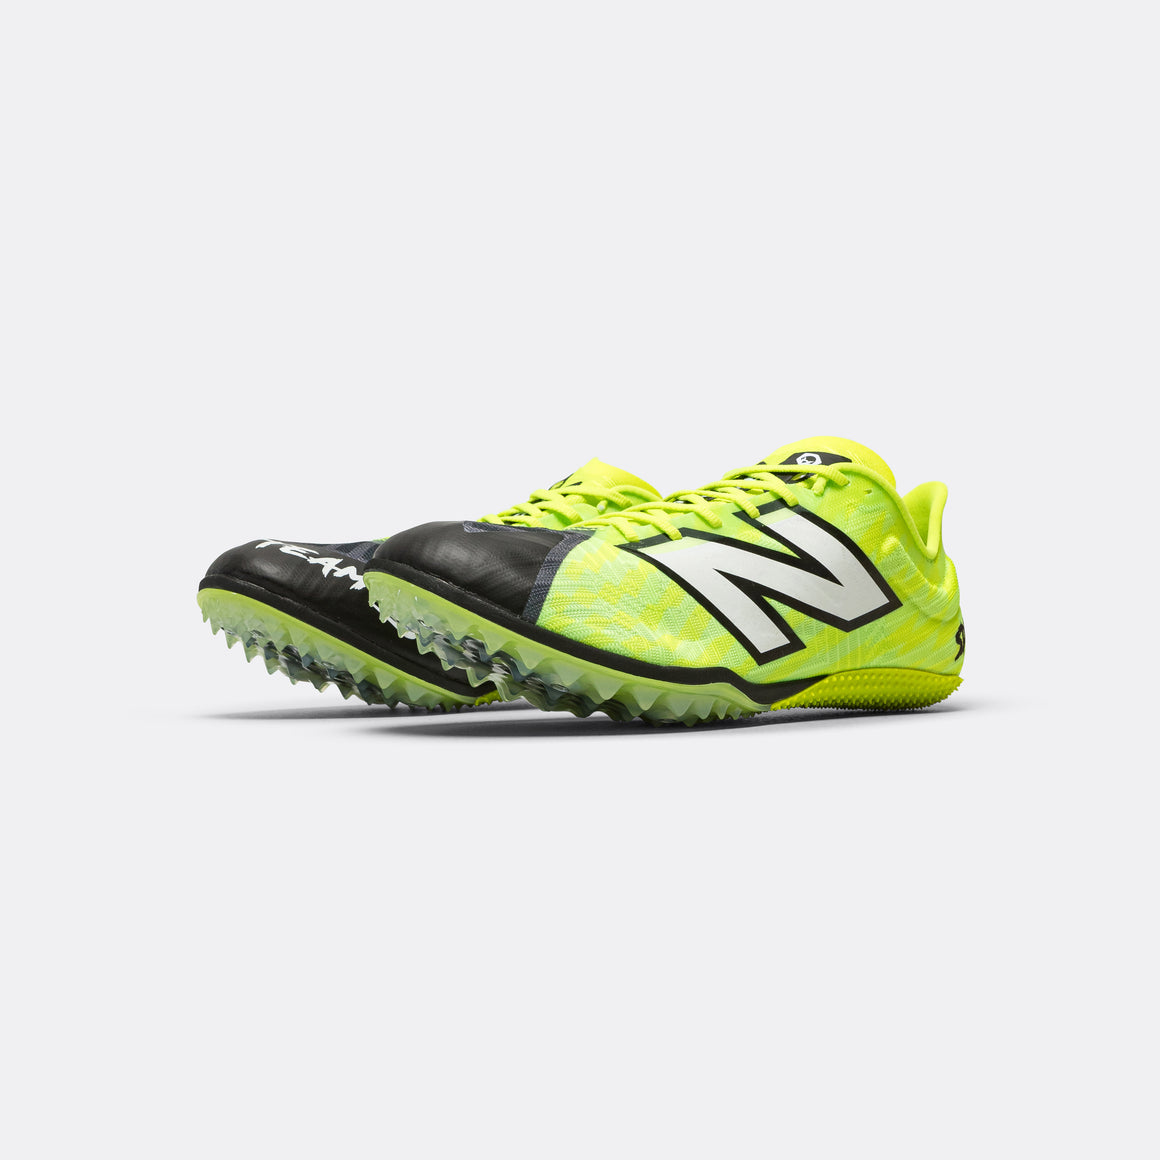 New Balance - Mens Fuelcell SD 100 v5 - Neon Green - Up There Athletics